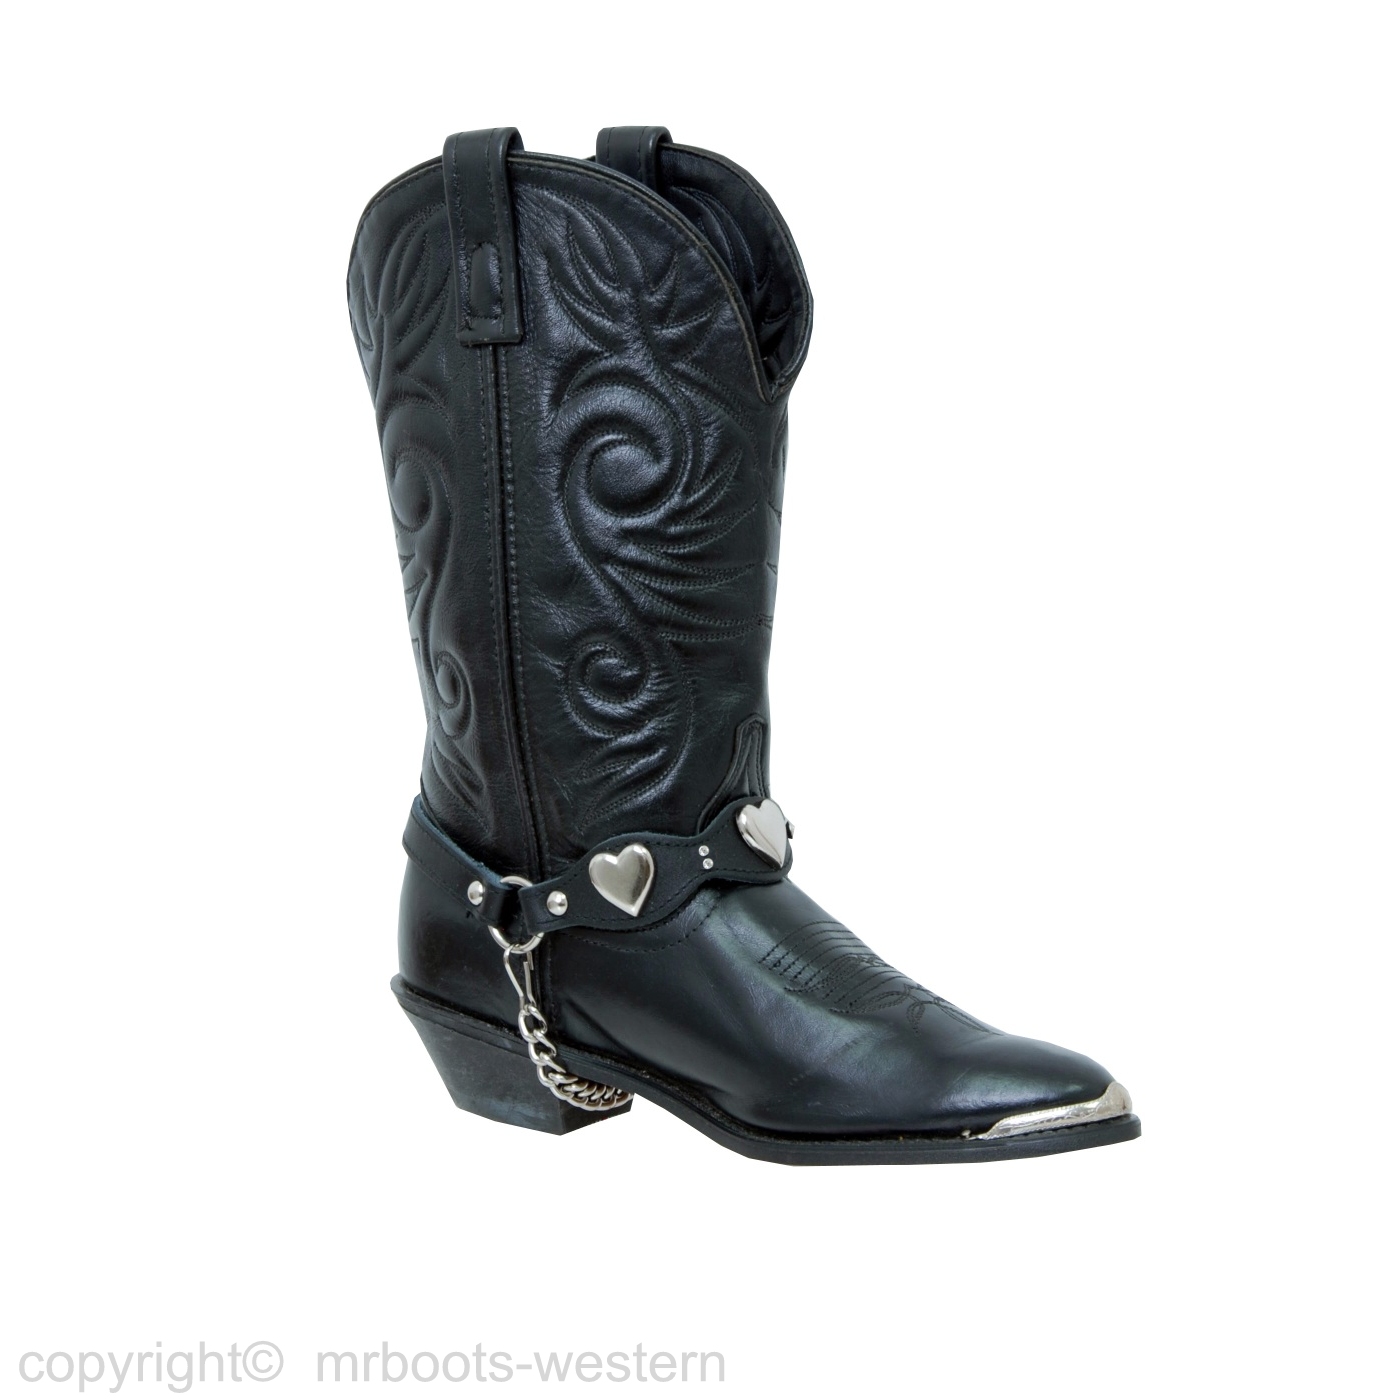 ALM-900-BLK Boot Strap Black Leather with Nickle Plated Hearts